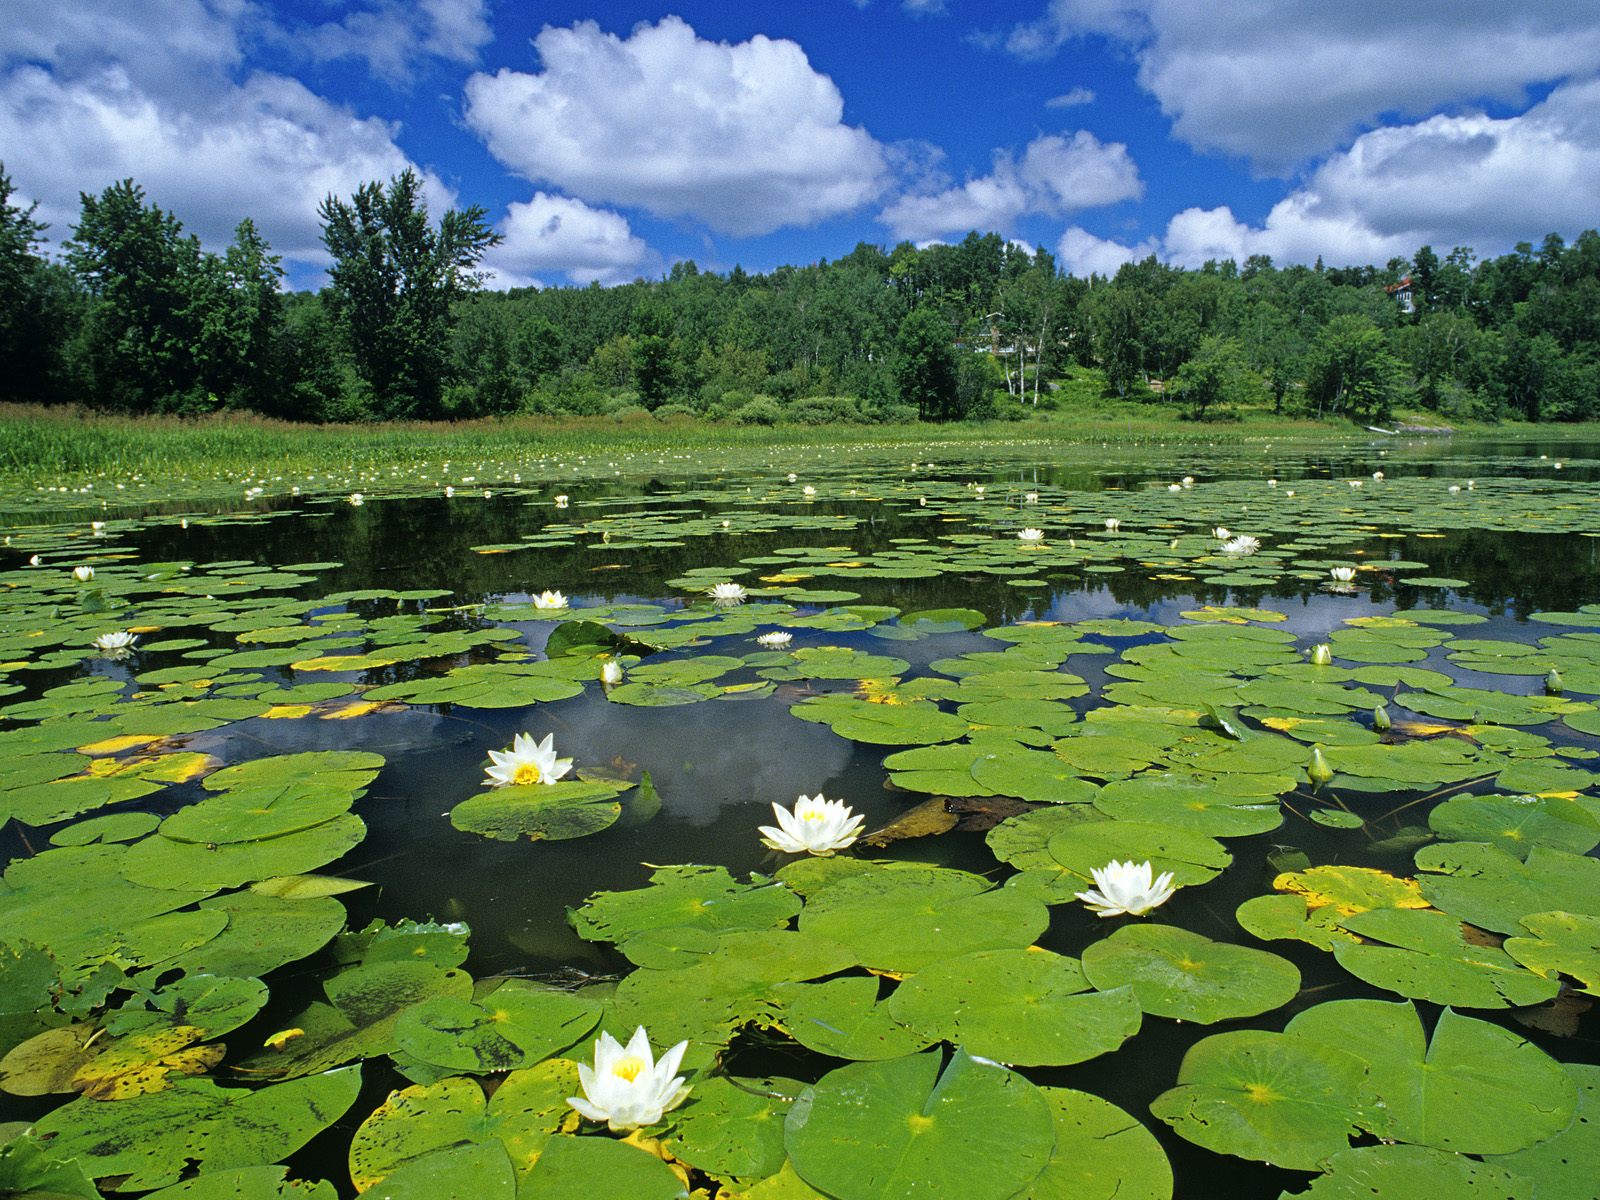 Water lillies covering a pond